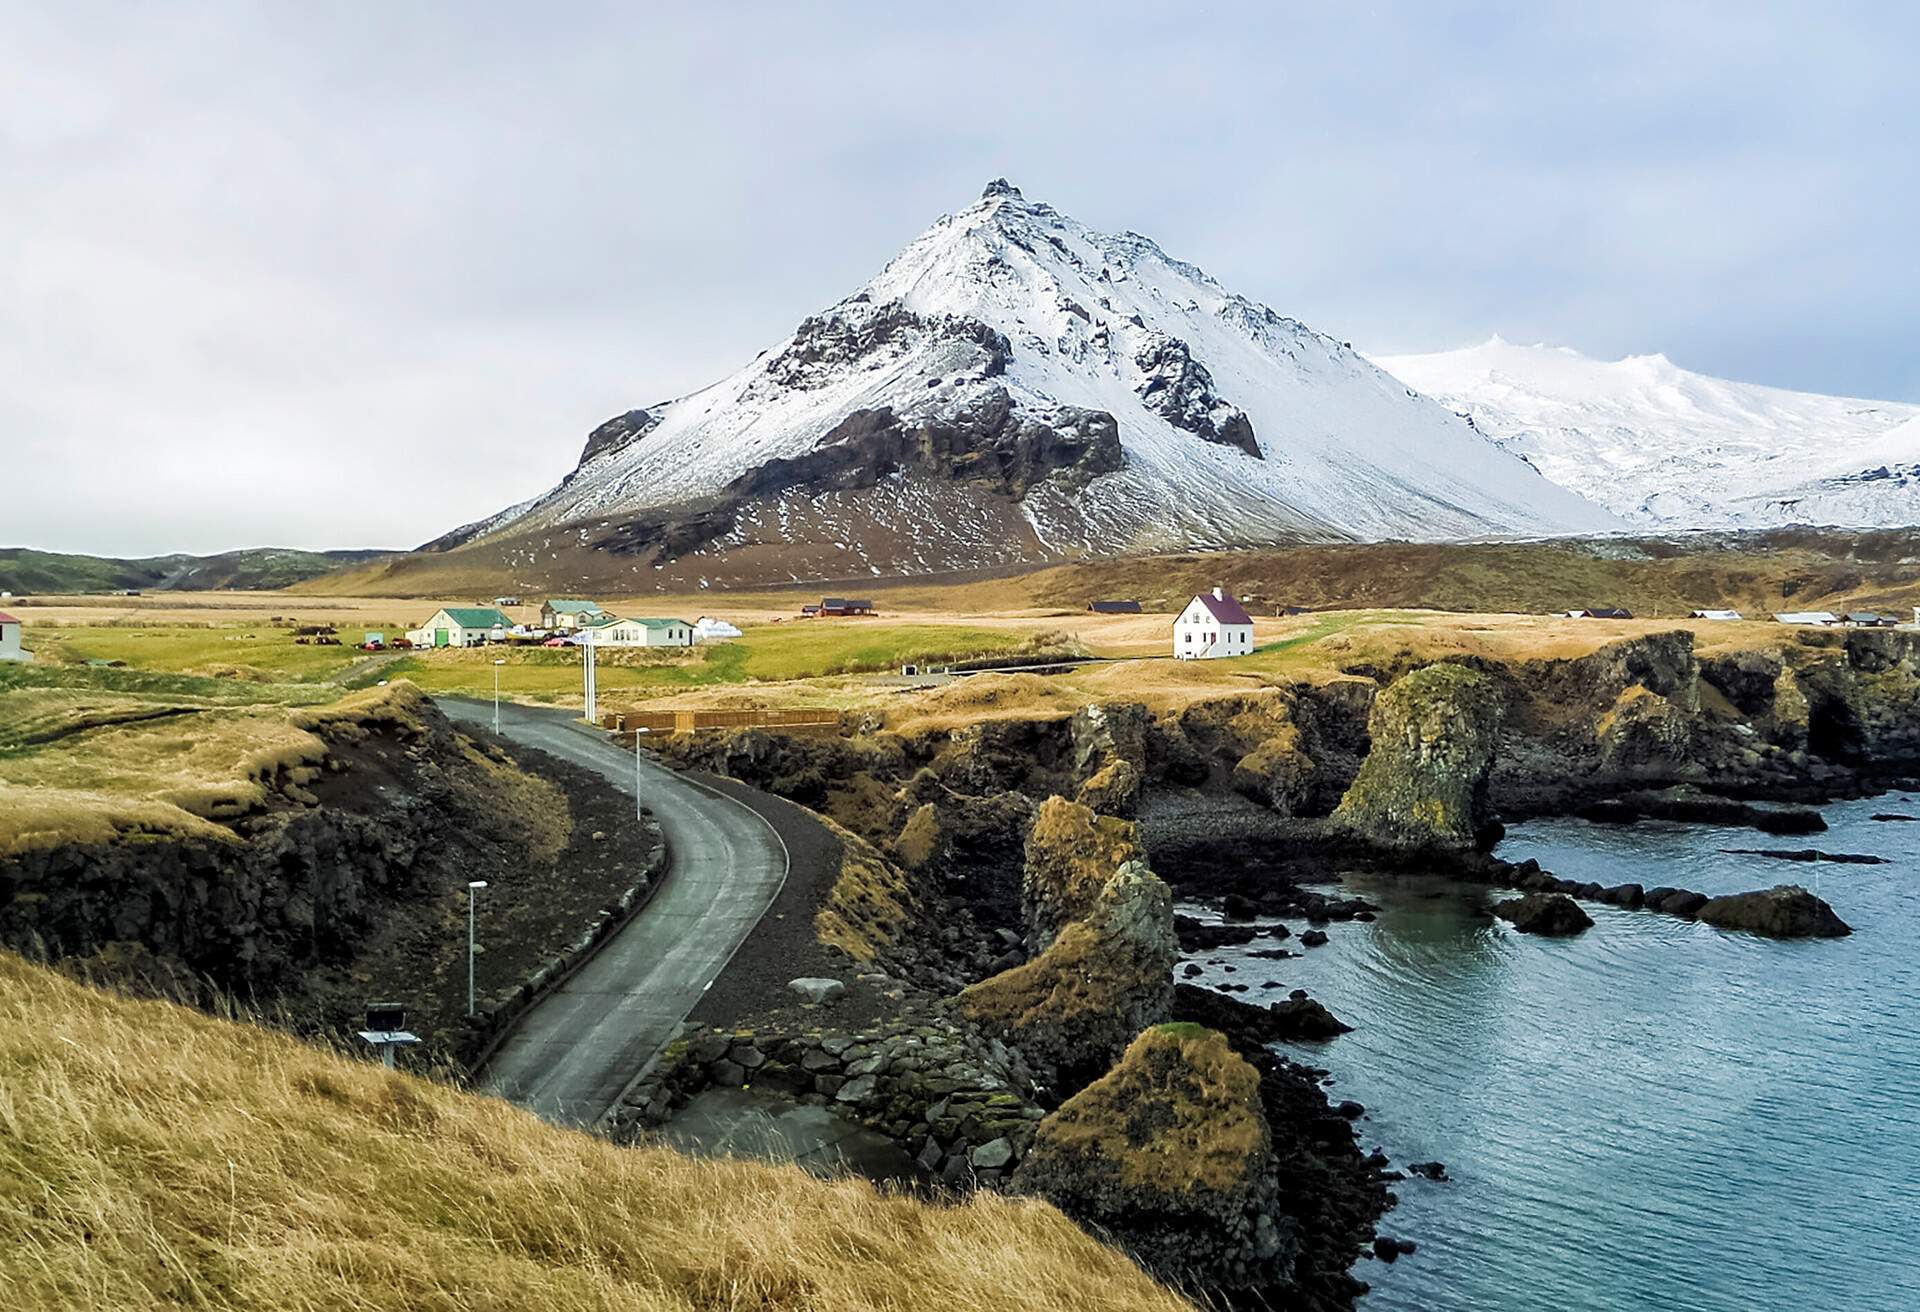 DEST_ICELAND_Snæfellsnes_GettyImages-1044472592